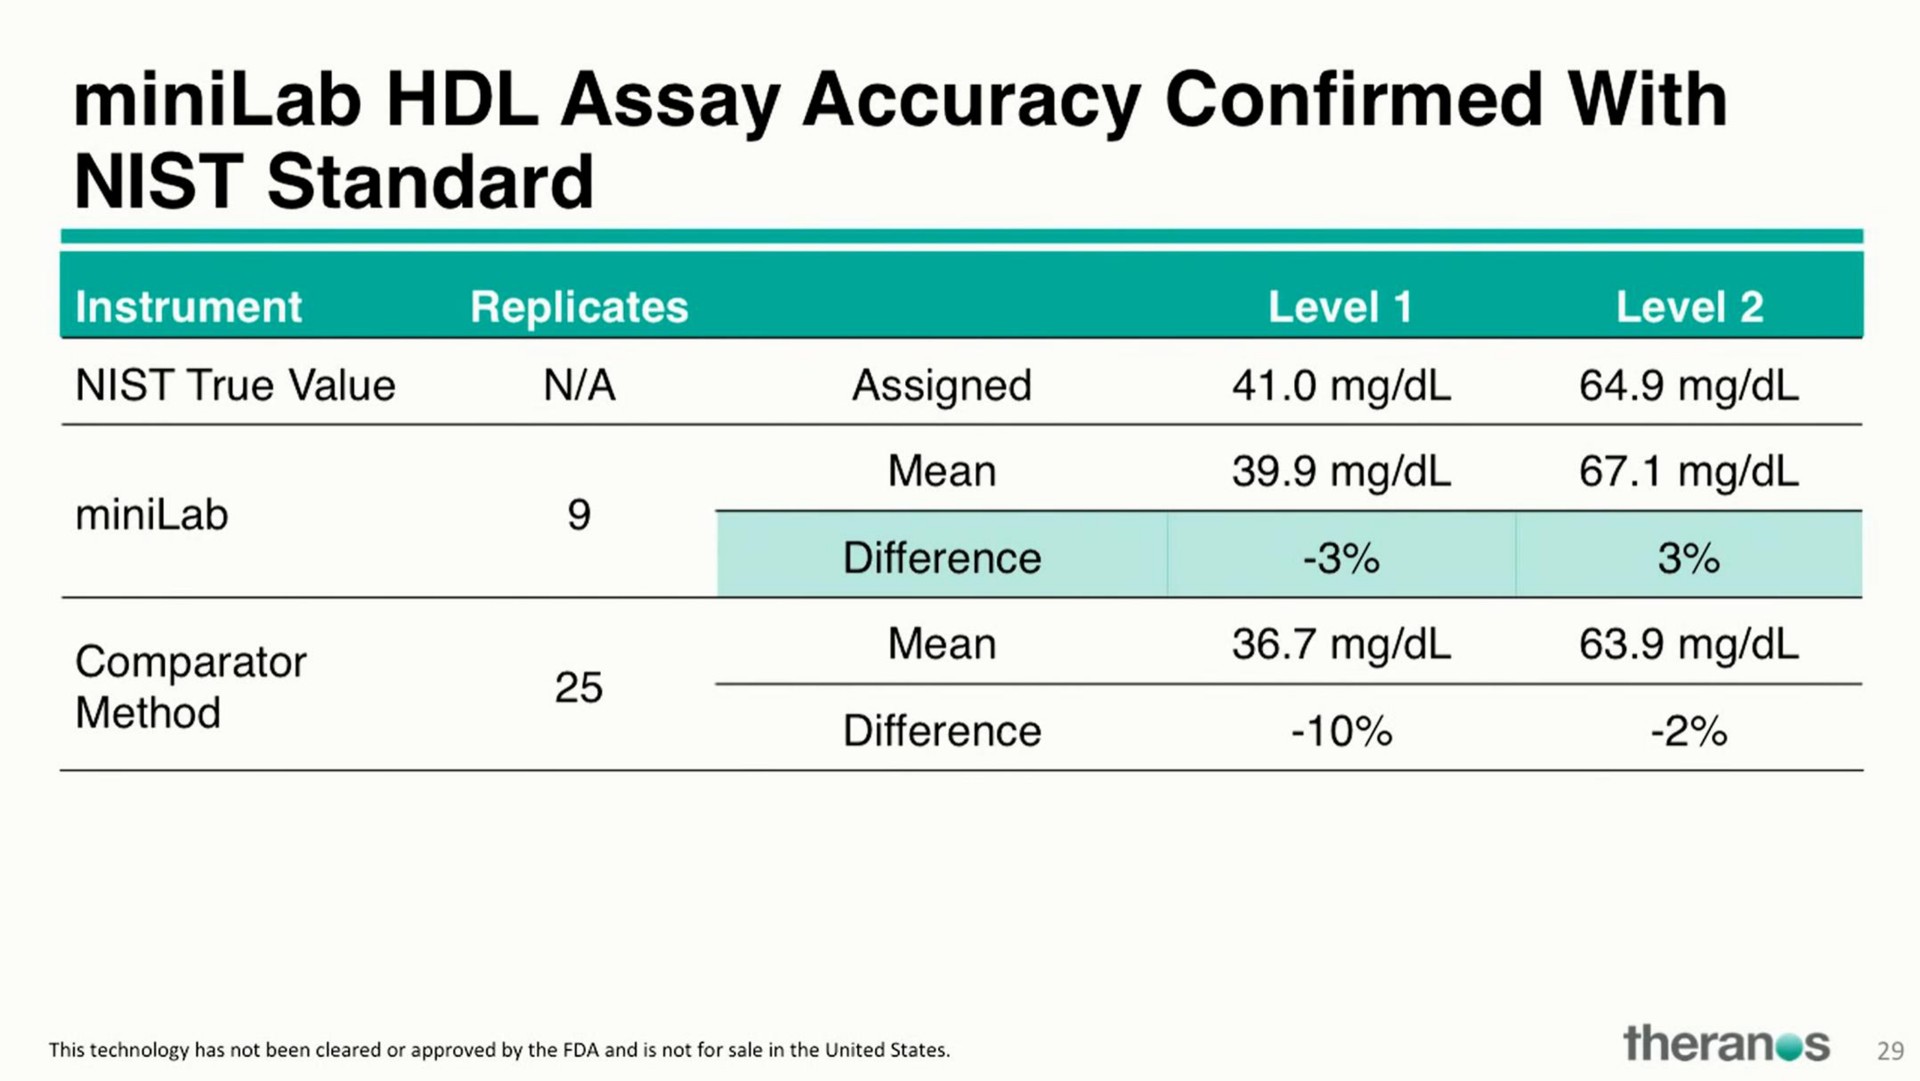 assay accuracy confirmed with standard | Theranos